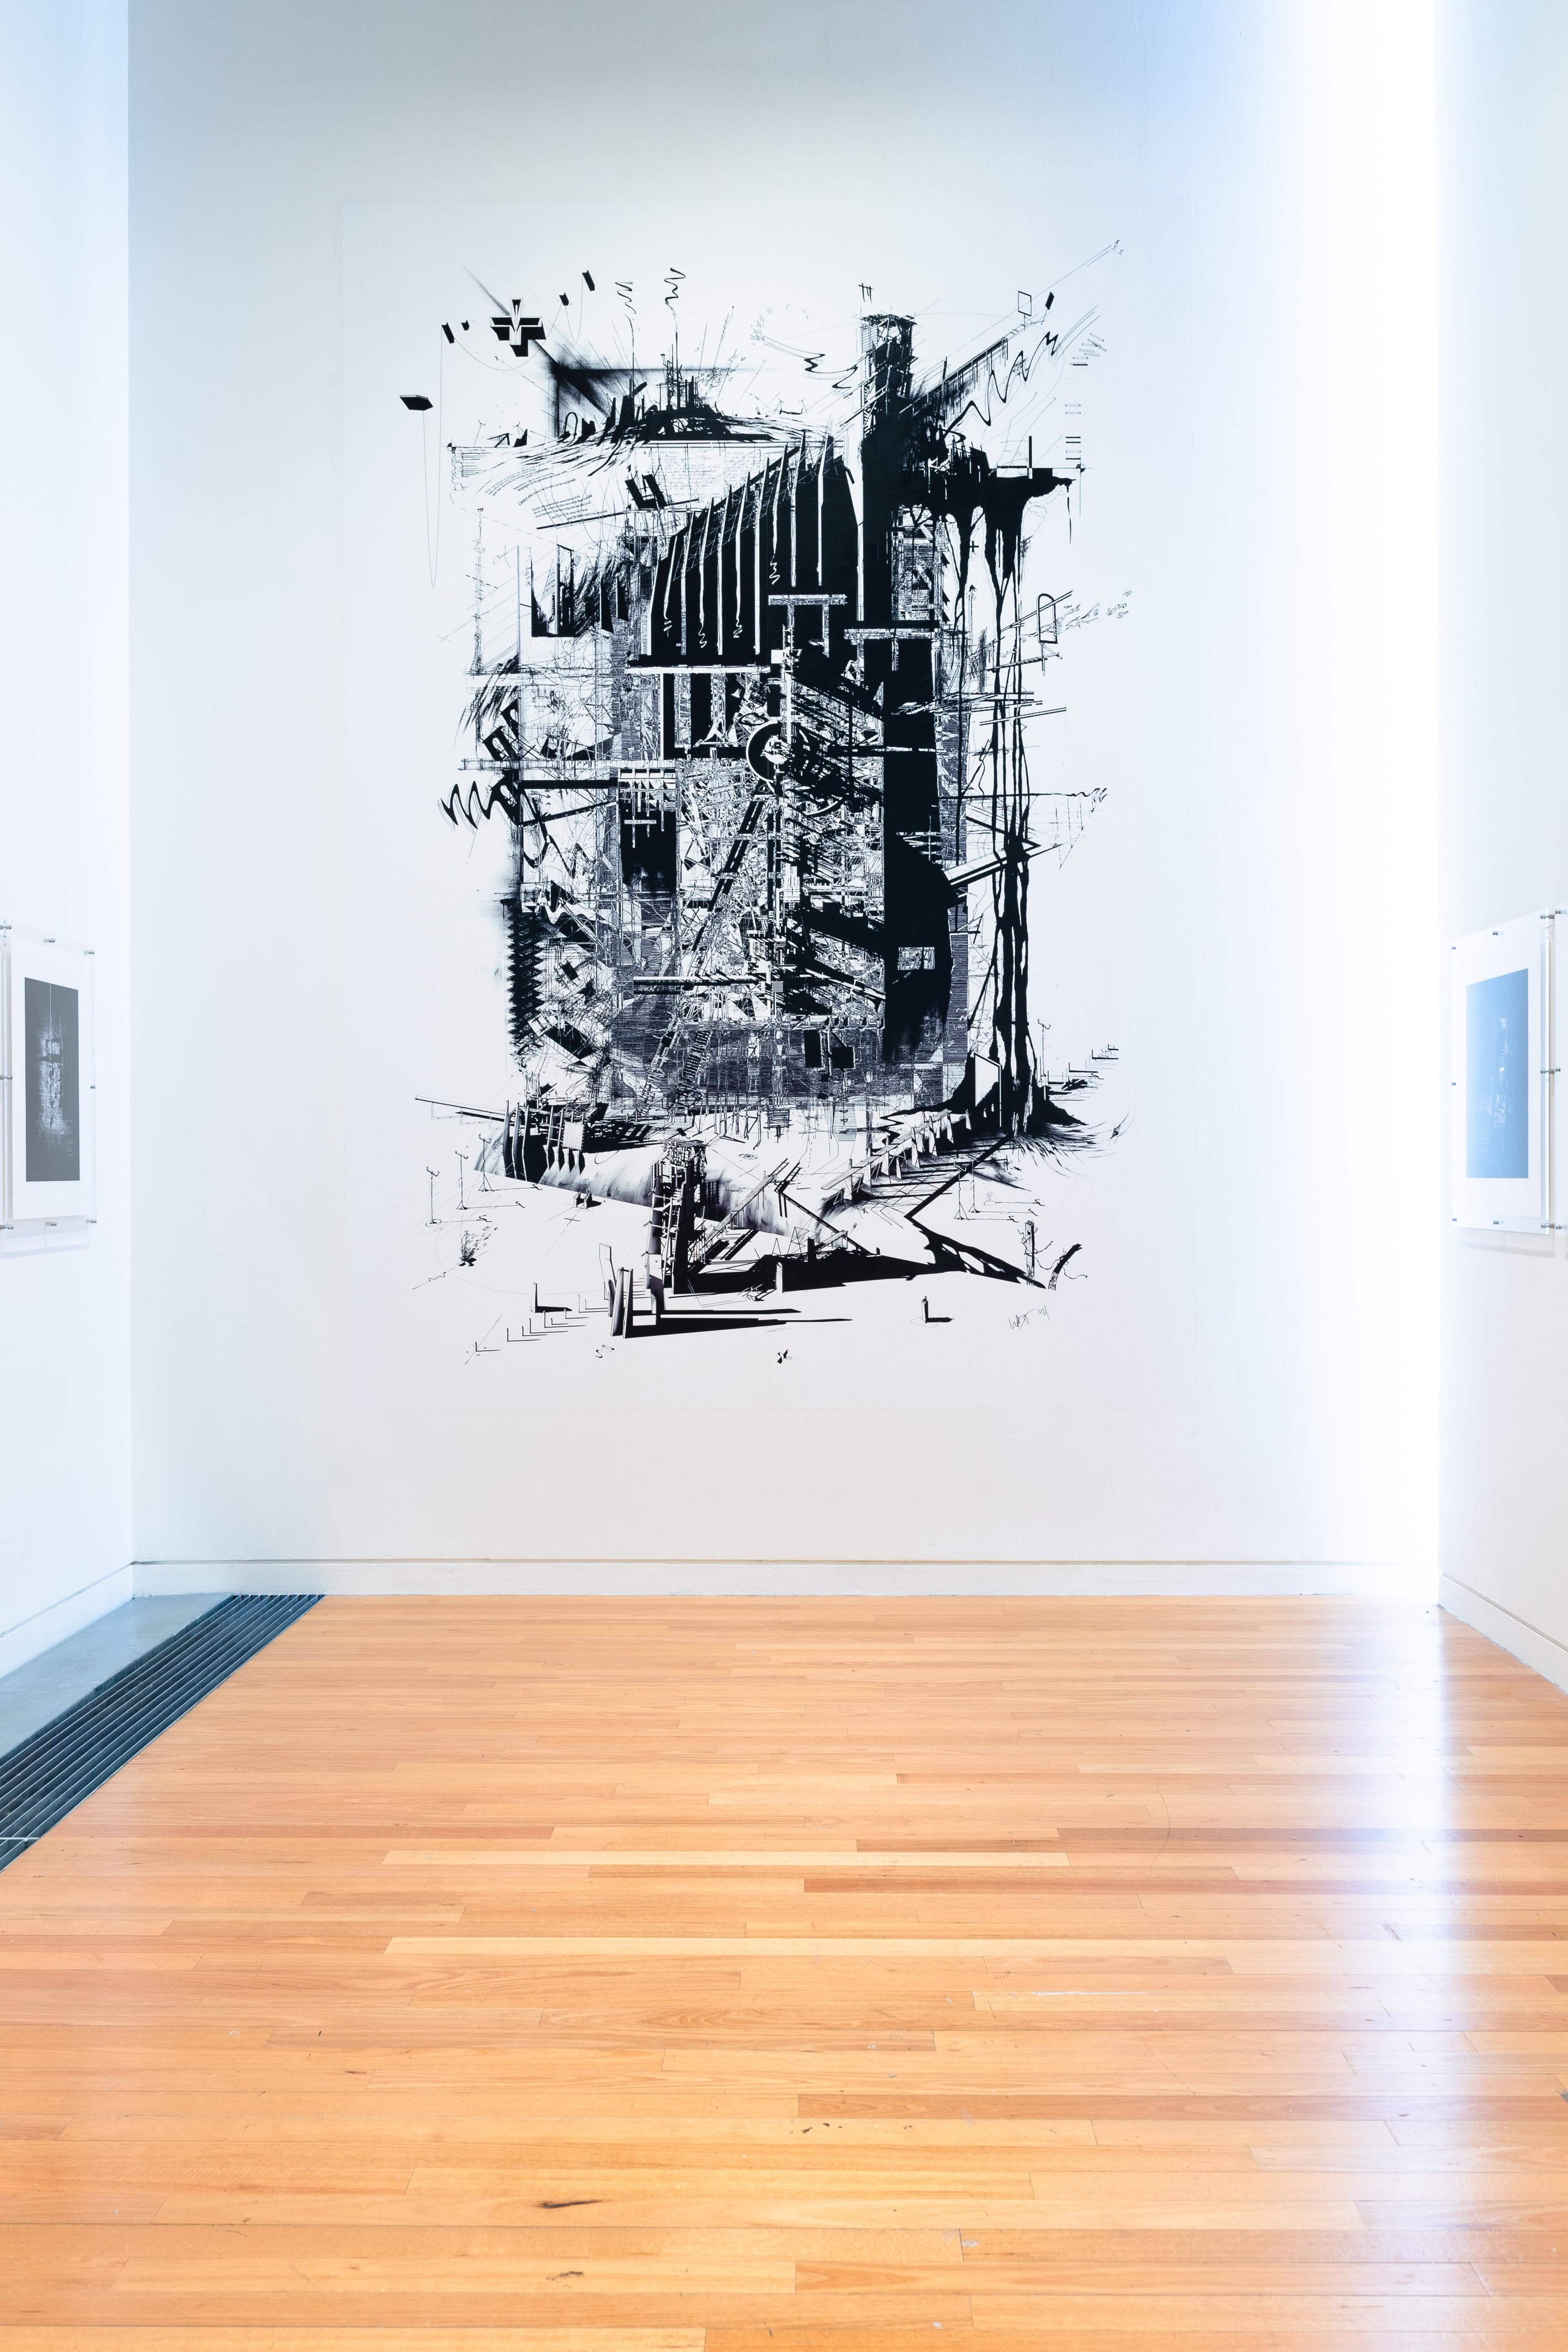 A gallery with white walls and wooden floors. A largescale print on the wall of a greyscale architectural drawing, with light from a window shining down the right side.